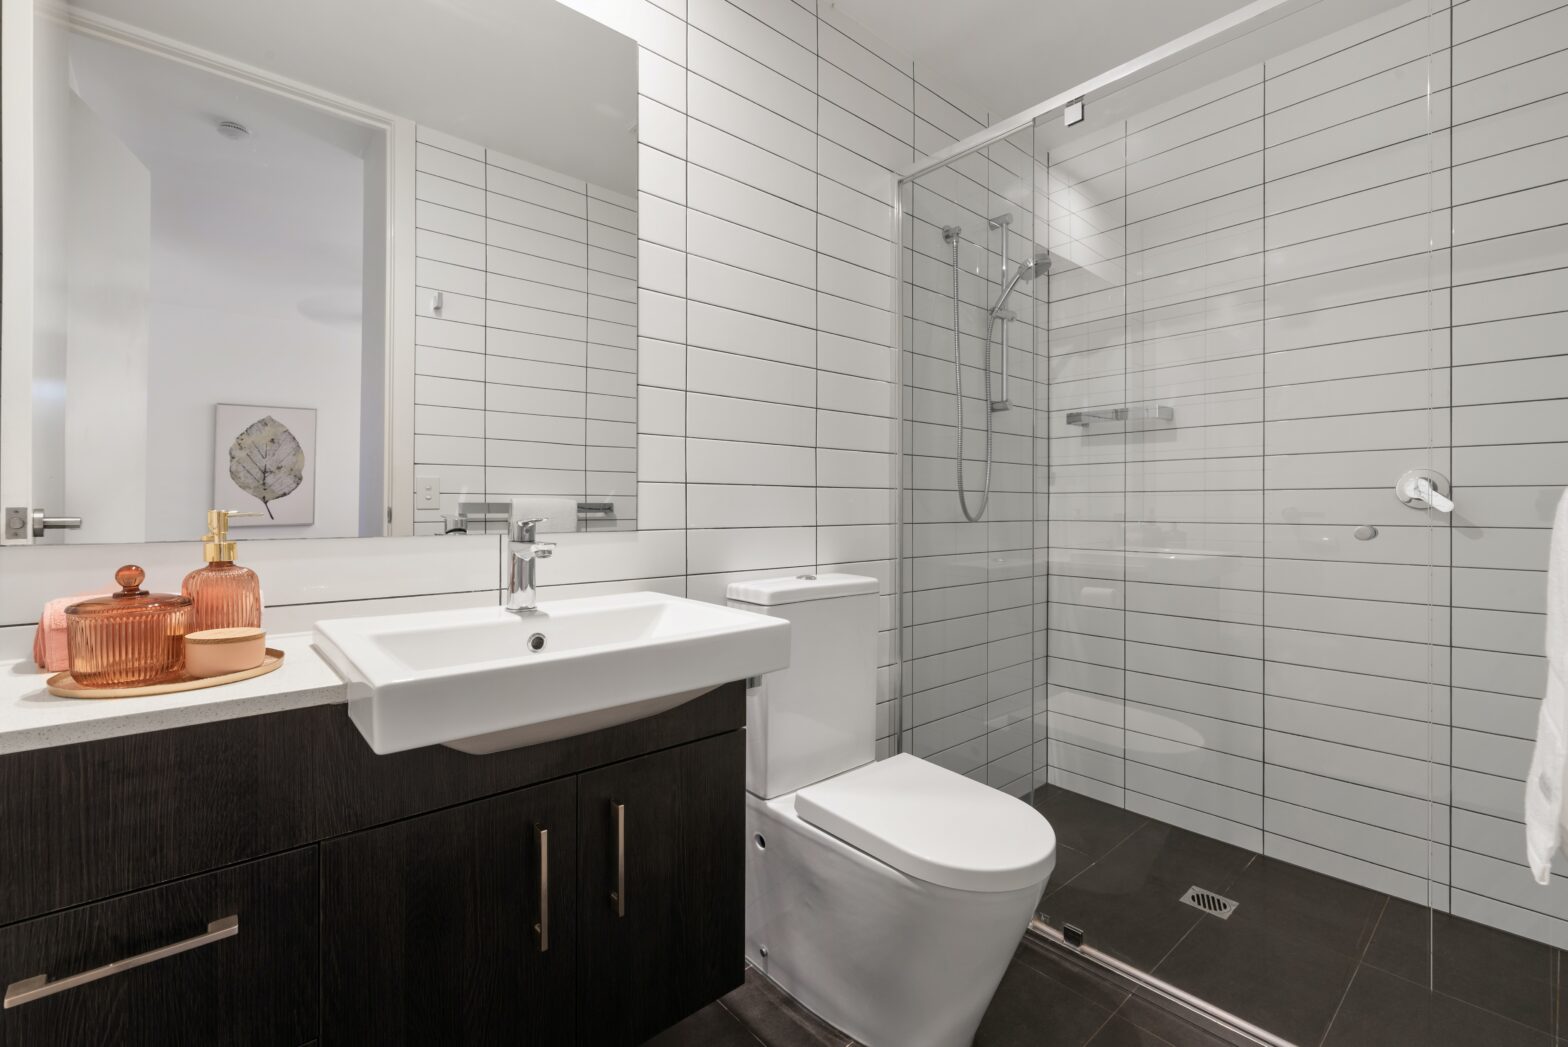 Want to fit a new shower into your small bathroom? Trust the Portland bathroom remodel experts!